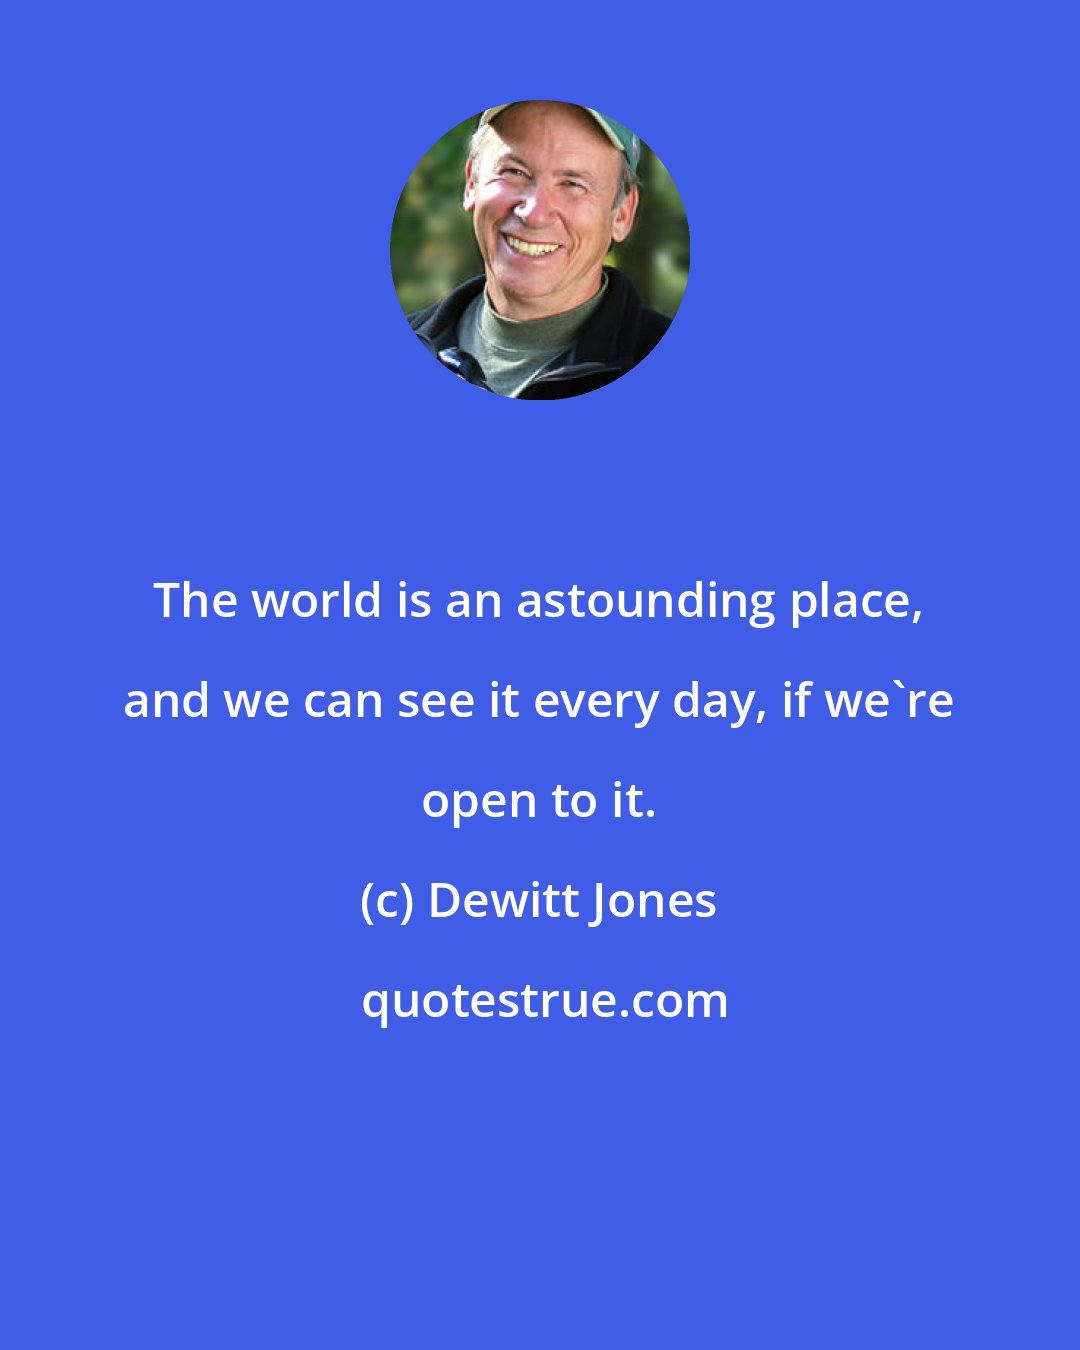 Dewitt Jones: The world is an astounding place, and we can see it every day, if we're open to it.